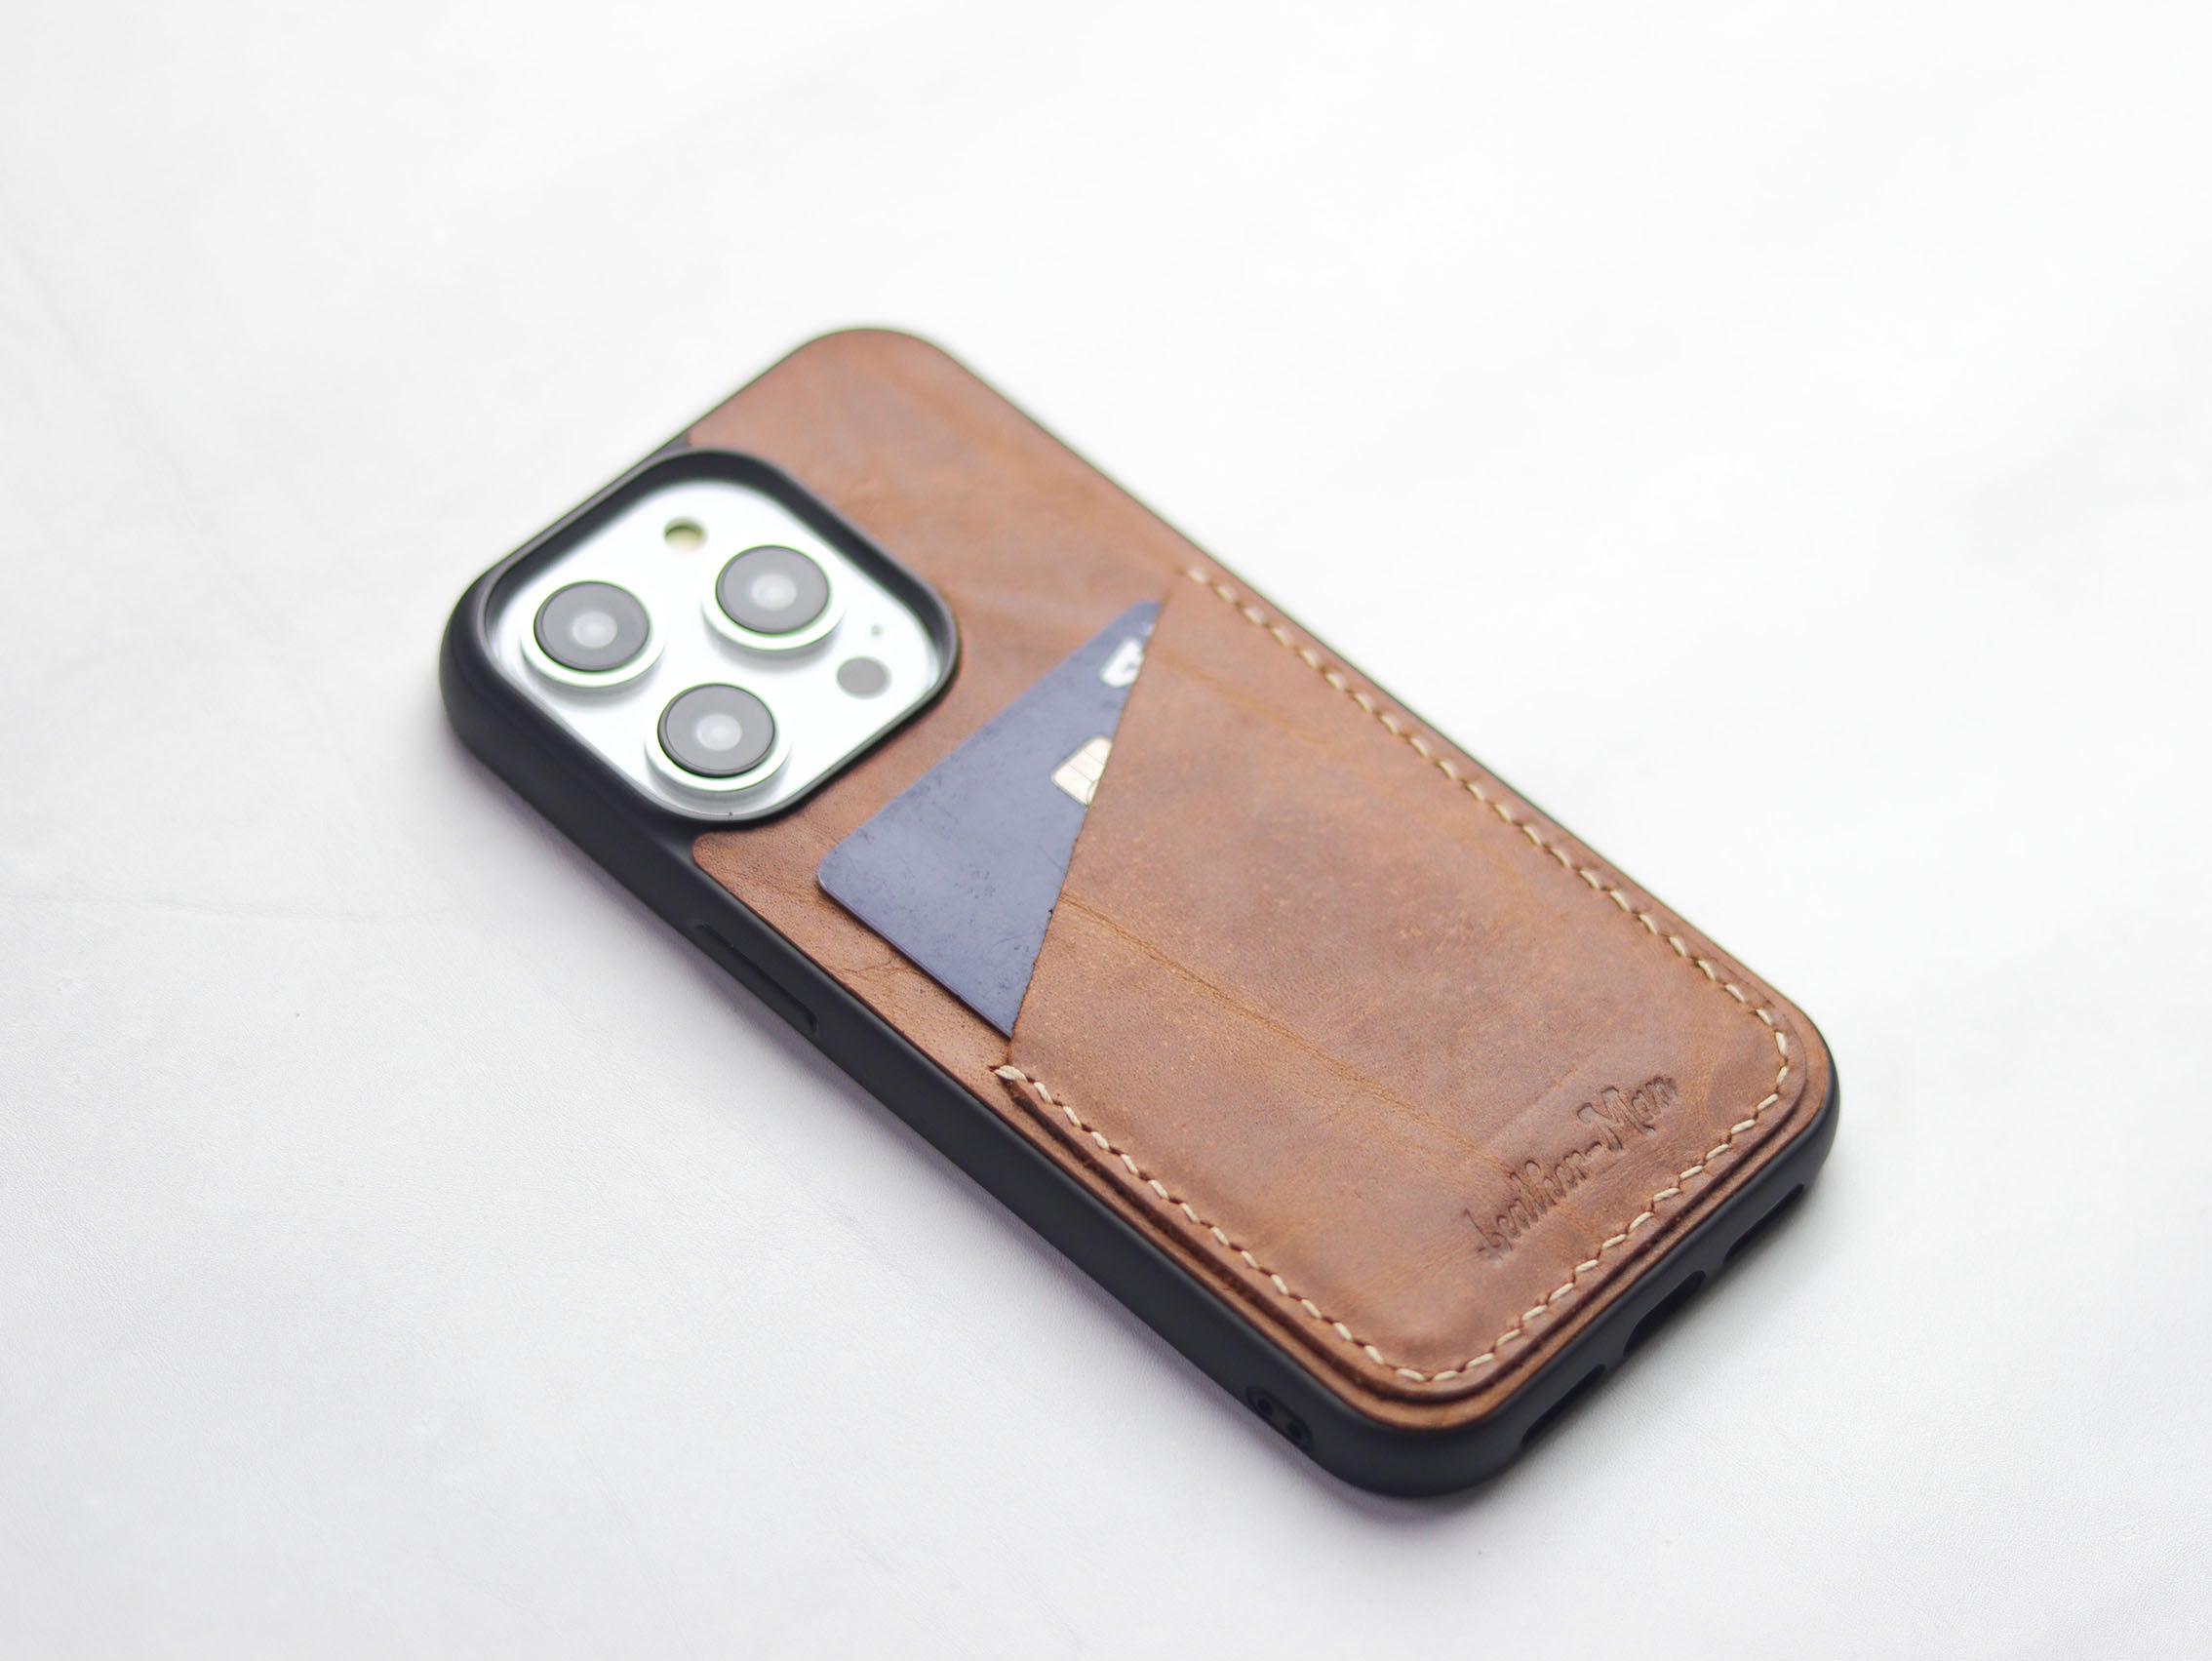 CARAMEL BROWN LEATHER WALLET PHONE CASE